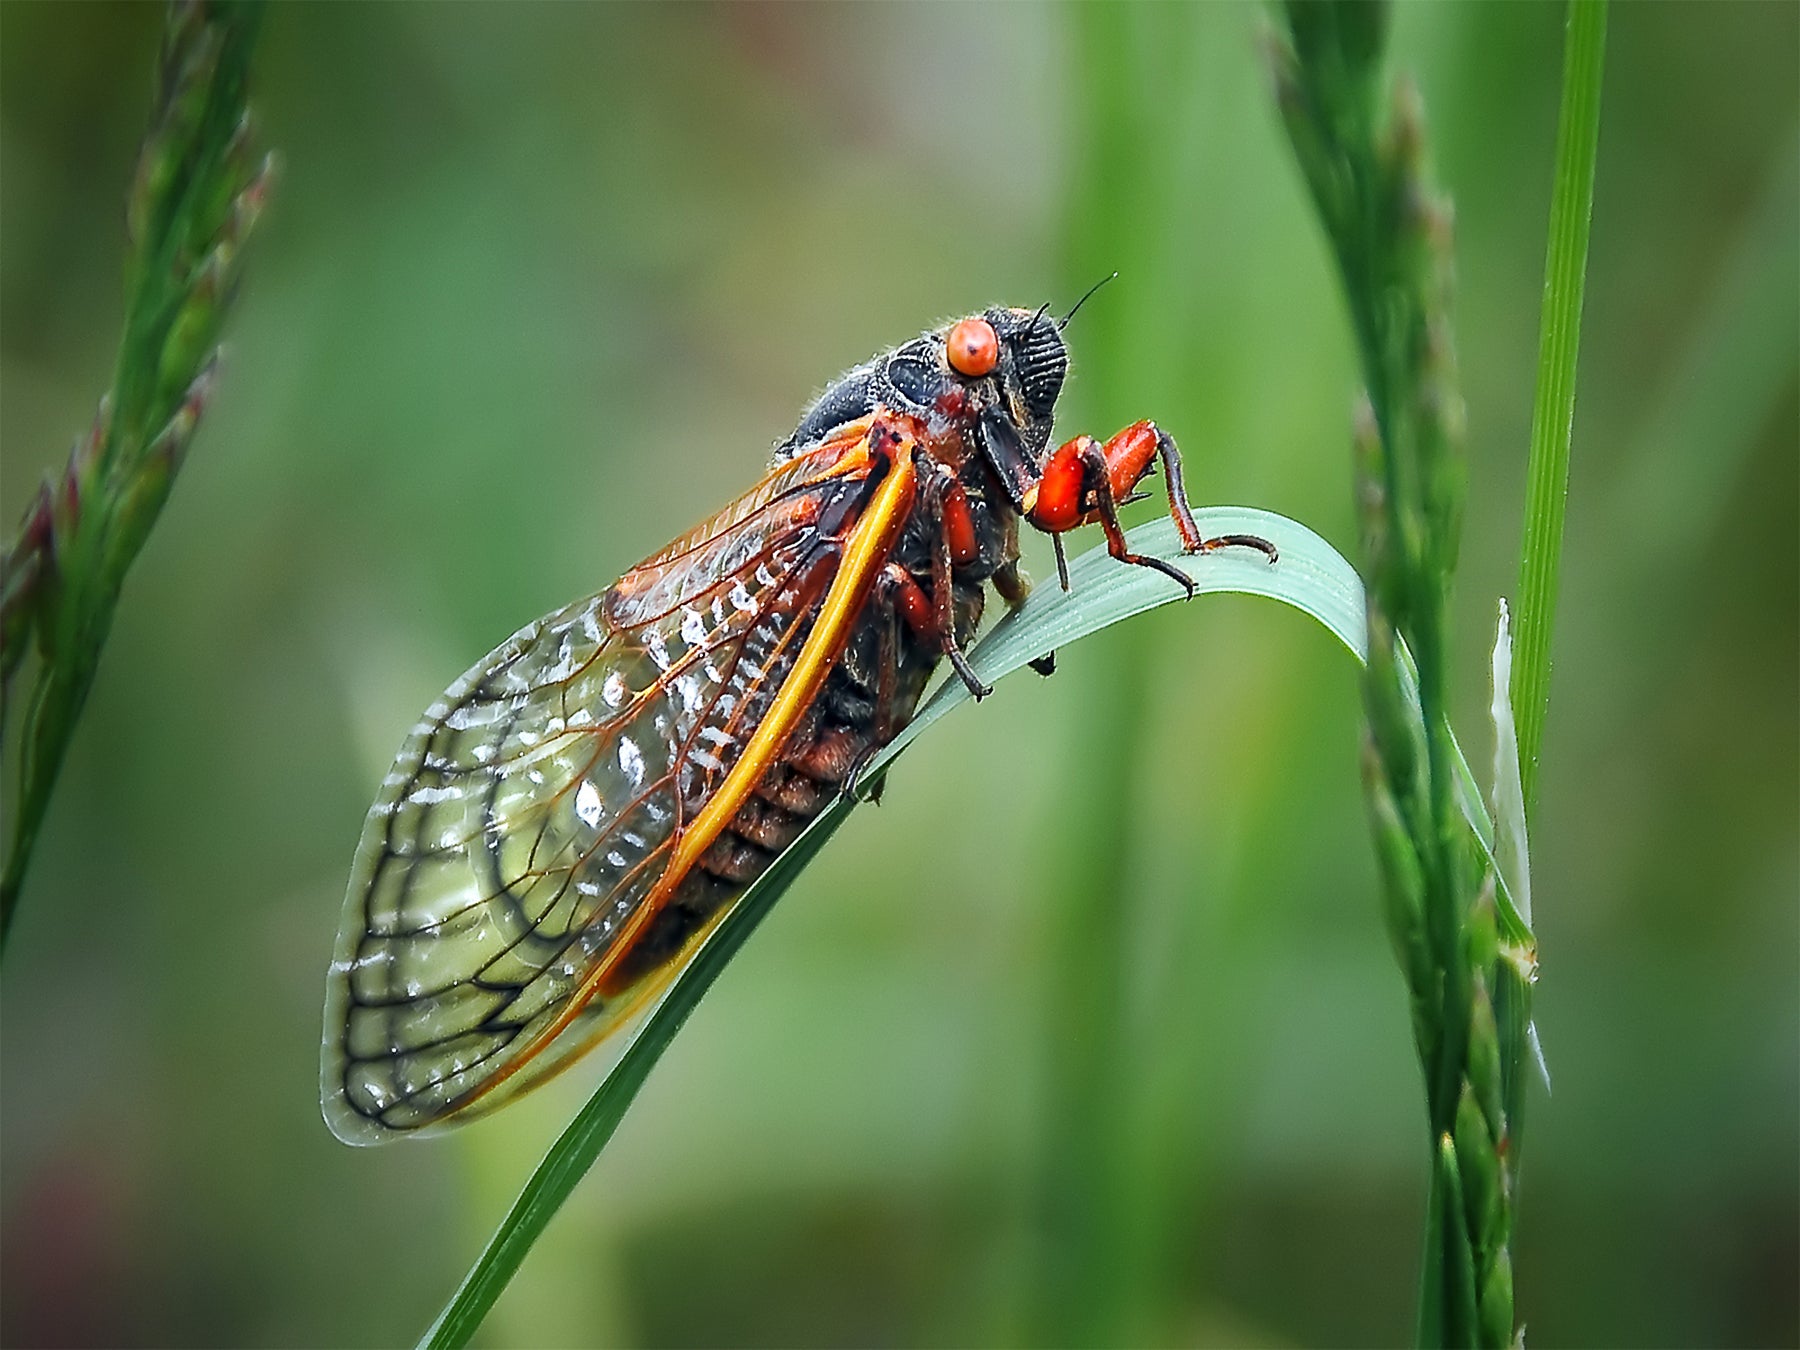 Adult periodical cicada sitting on a blade of grass